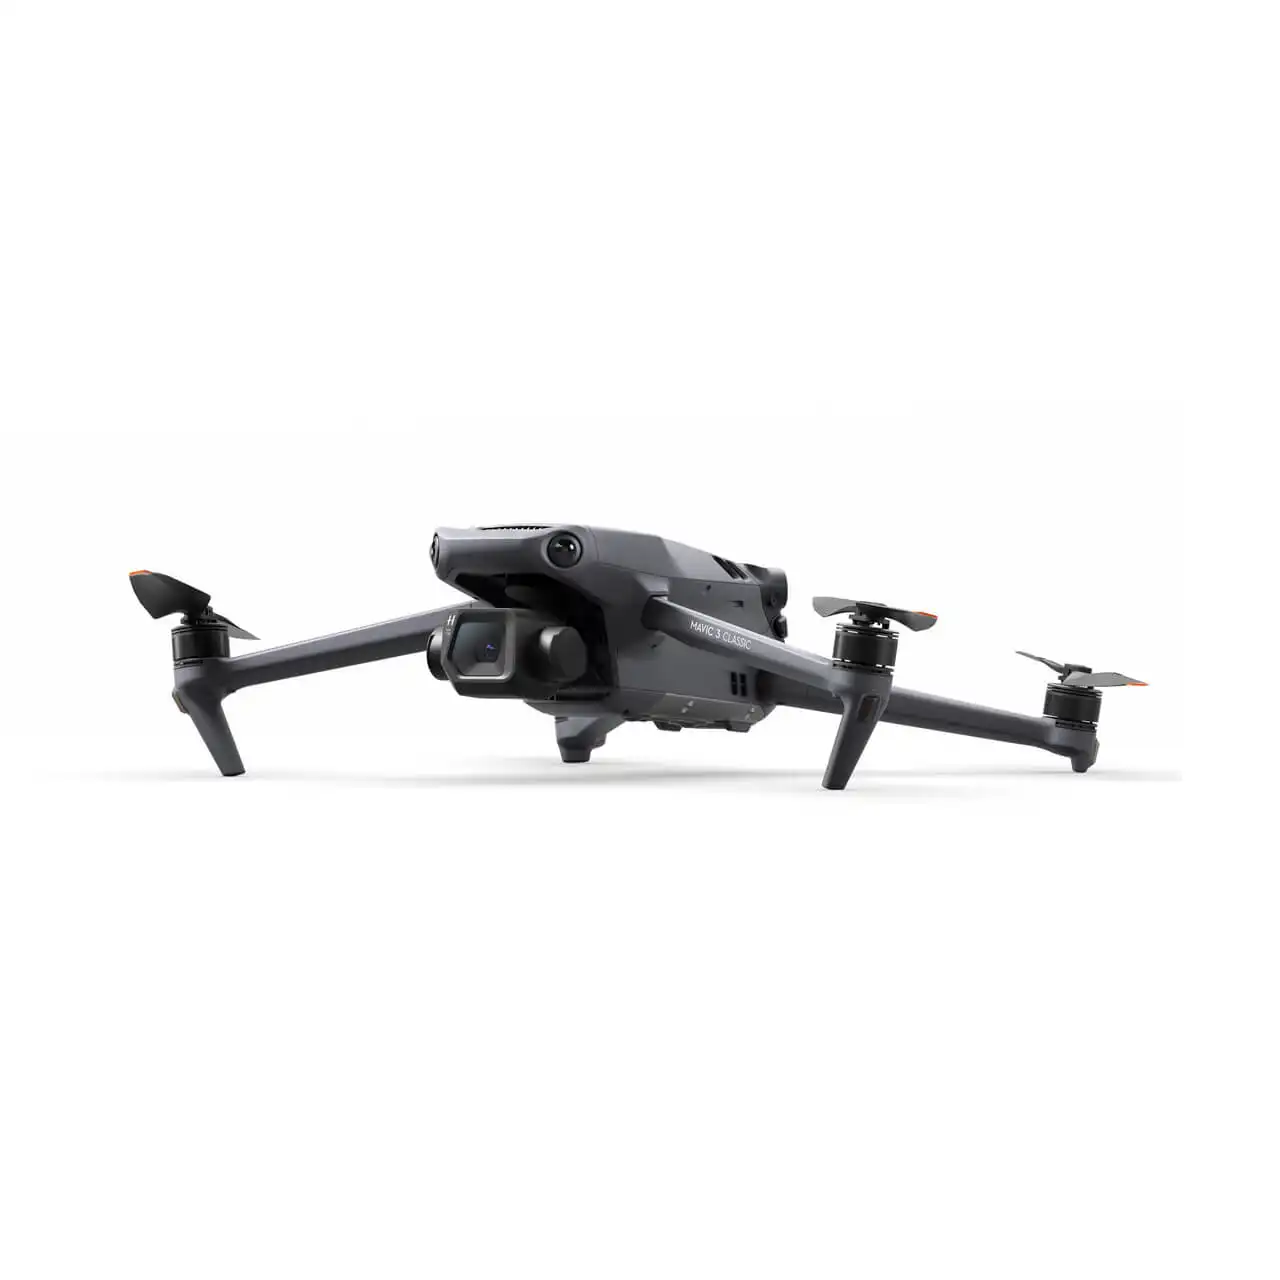 New Mavic 3 Classic (Drone Only) Hasselblad Camera 5.1K/50fps 28x Zoom 46 Minutes Flight Time 15km Max Transmission